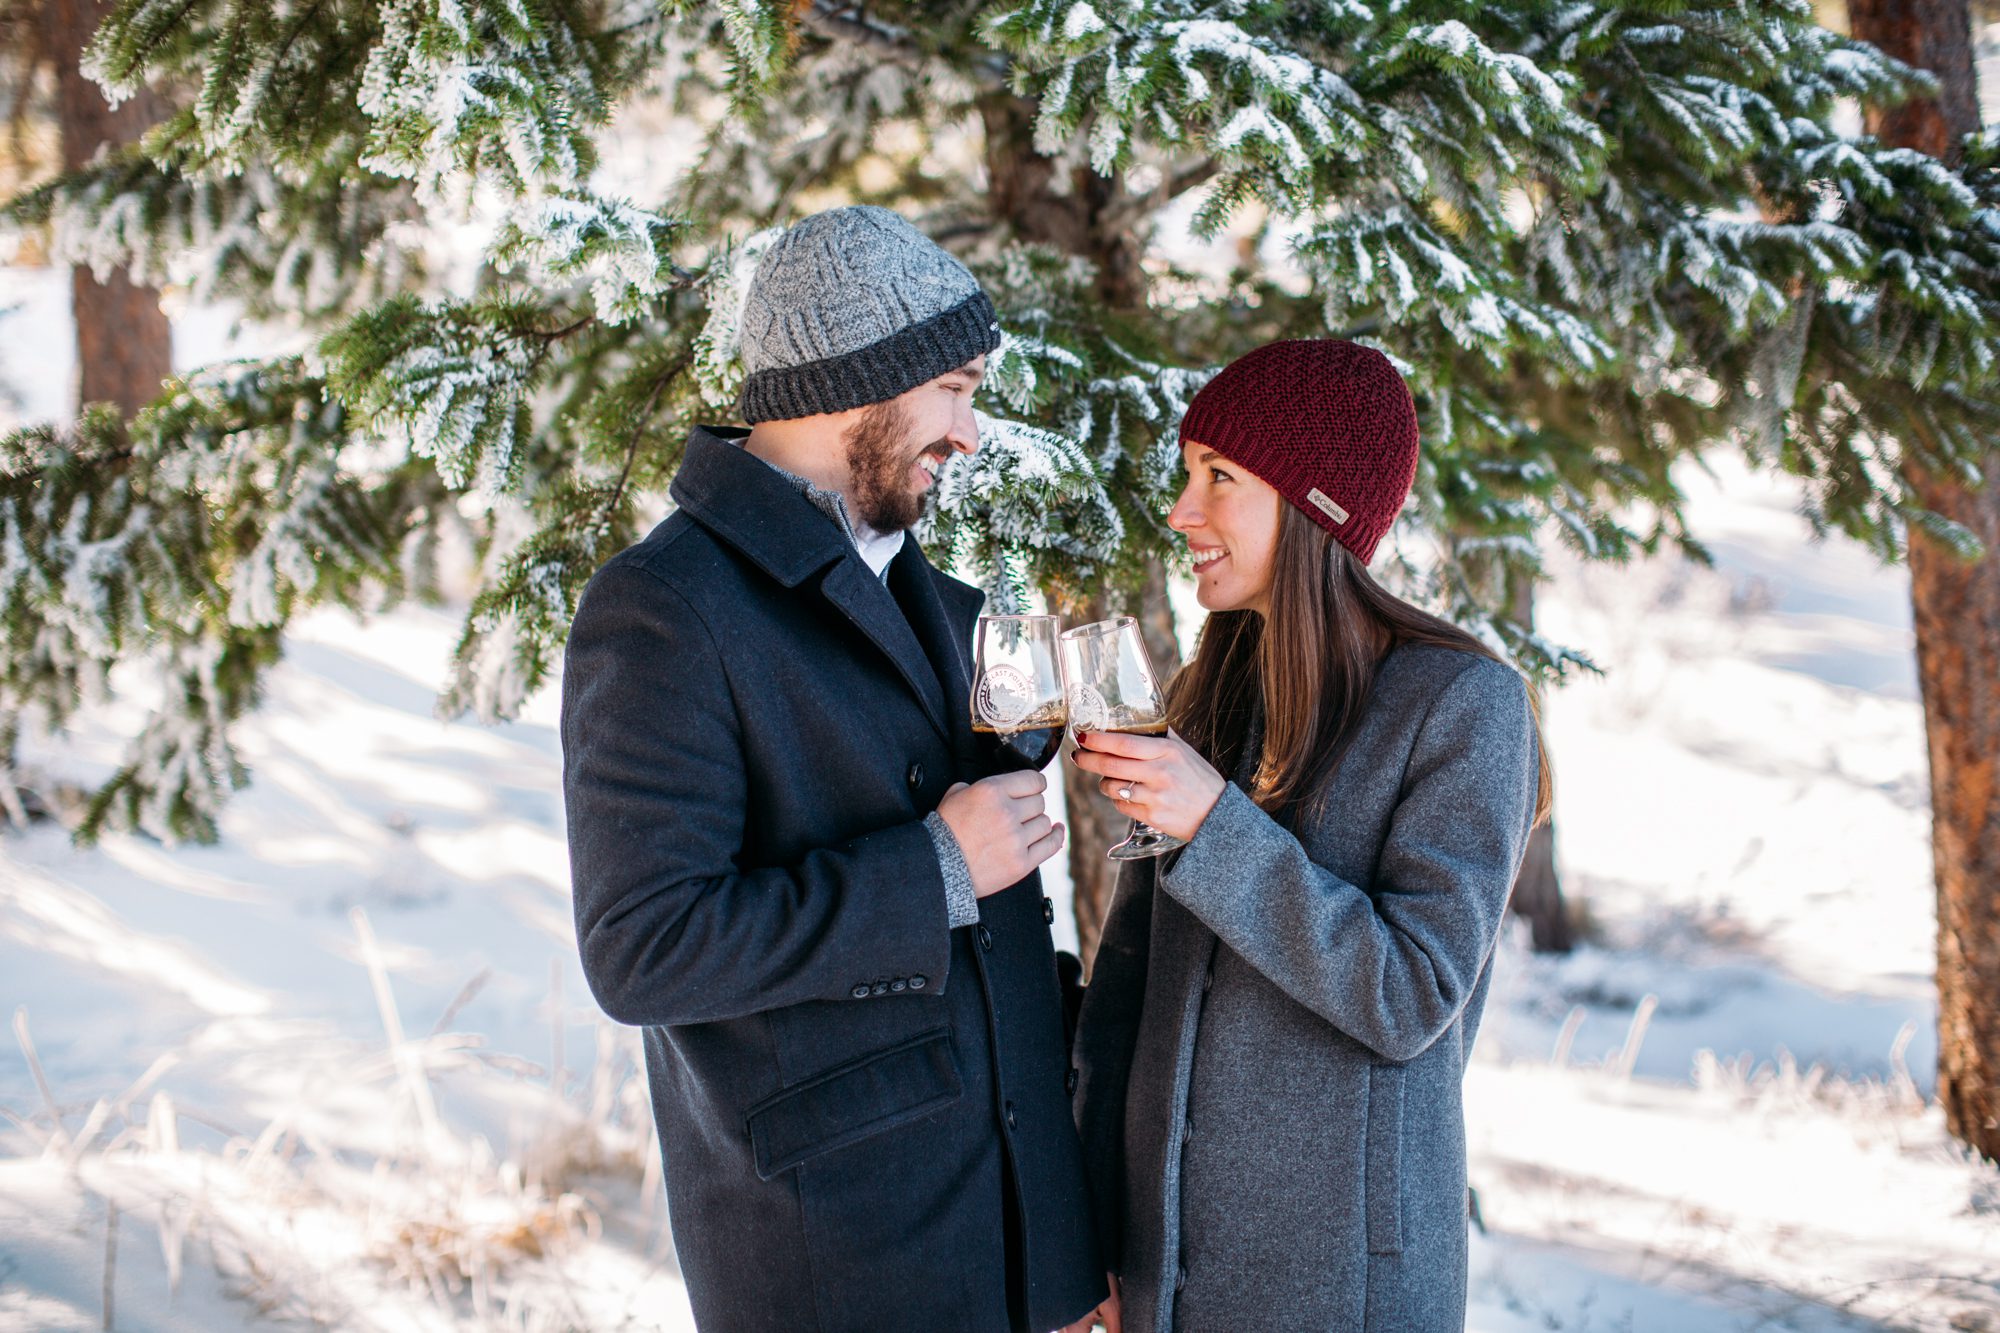 beer engagement session, winter engagement session, winter engagement photos, cute engagement photos, snowy engagement photos, colorado engagement, colorado engagement photographer, denver engagement photographer, cold weather engagement photos, couples photo posing, engagement photo posing